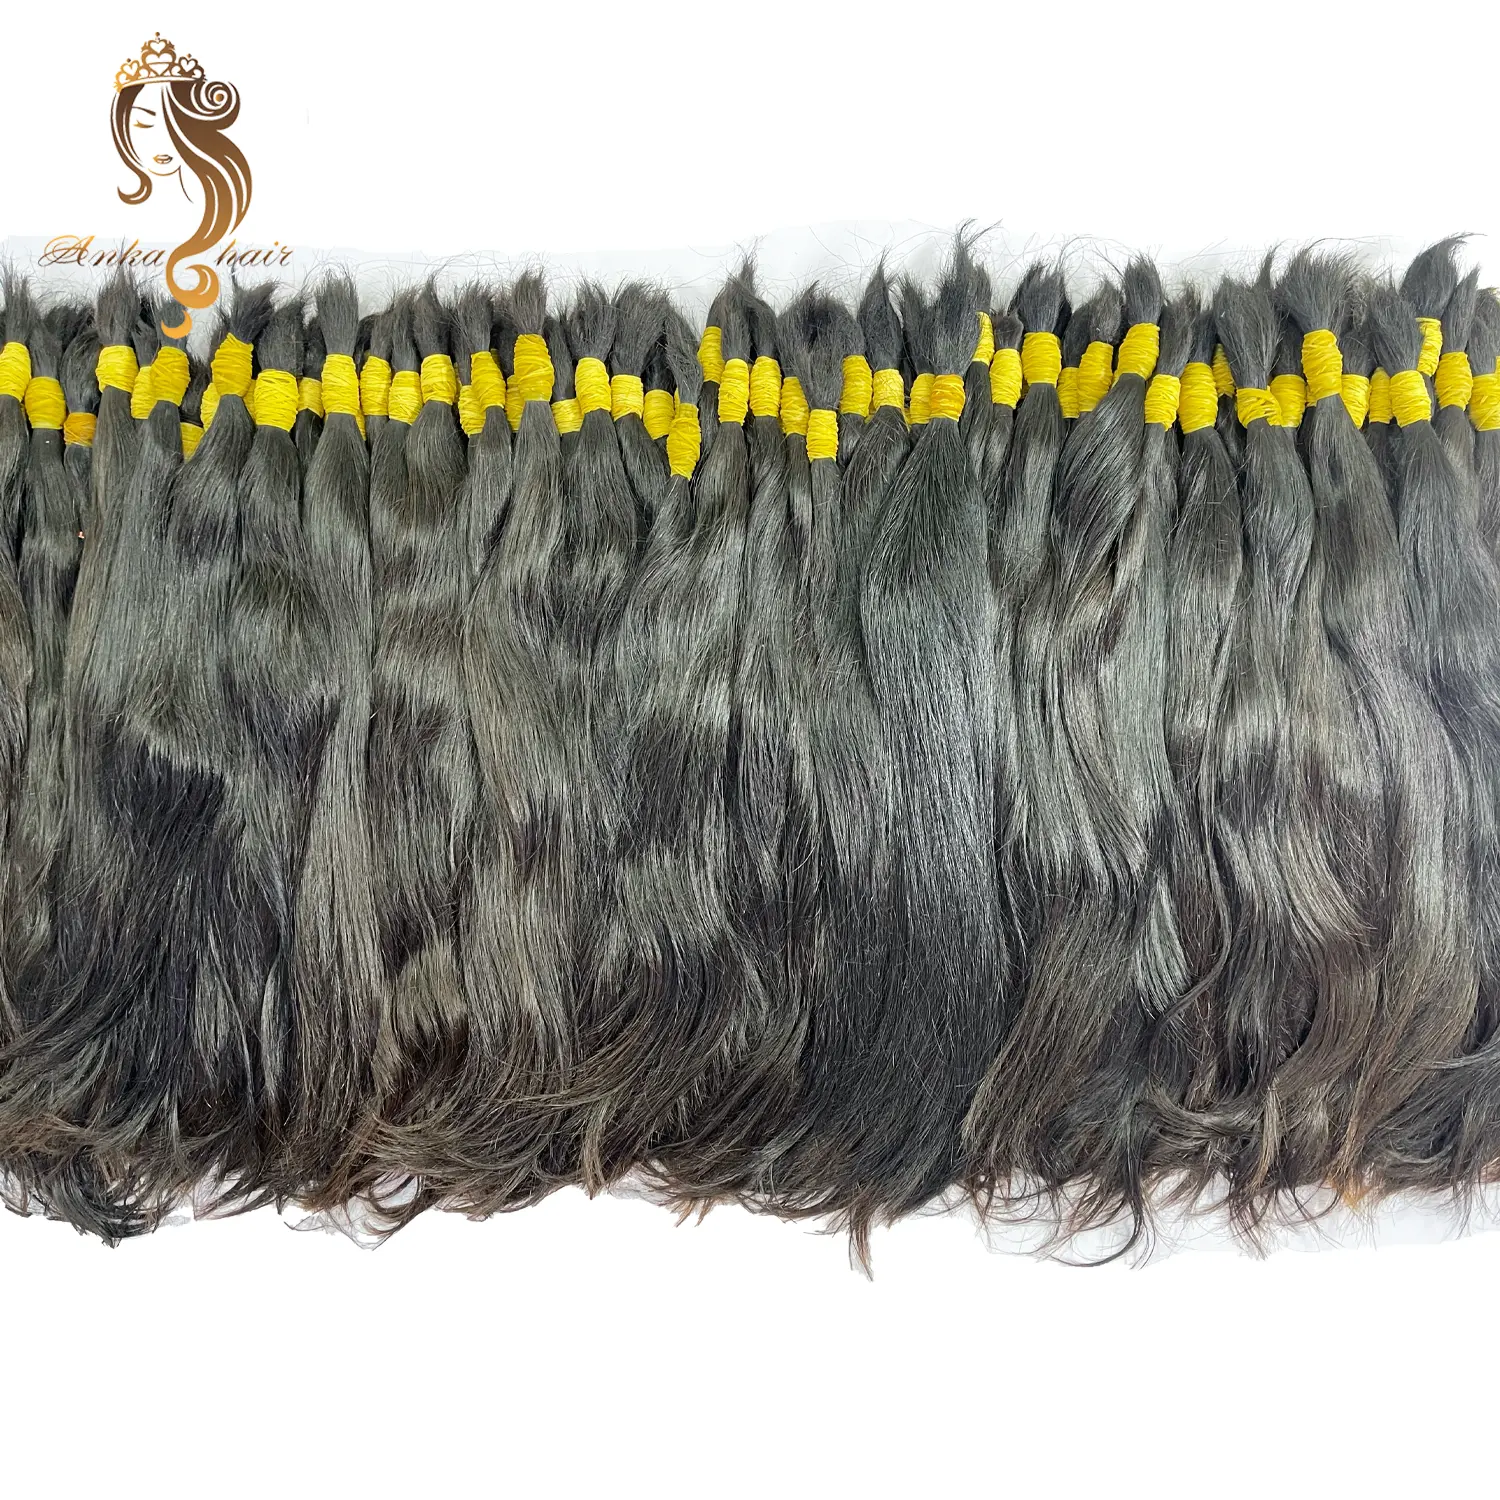 Easy To Use Best Quality Virgin Unprocessed 100% Natural Human Hair Extension From Anka Hair